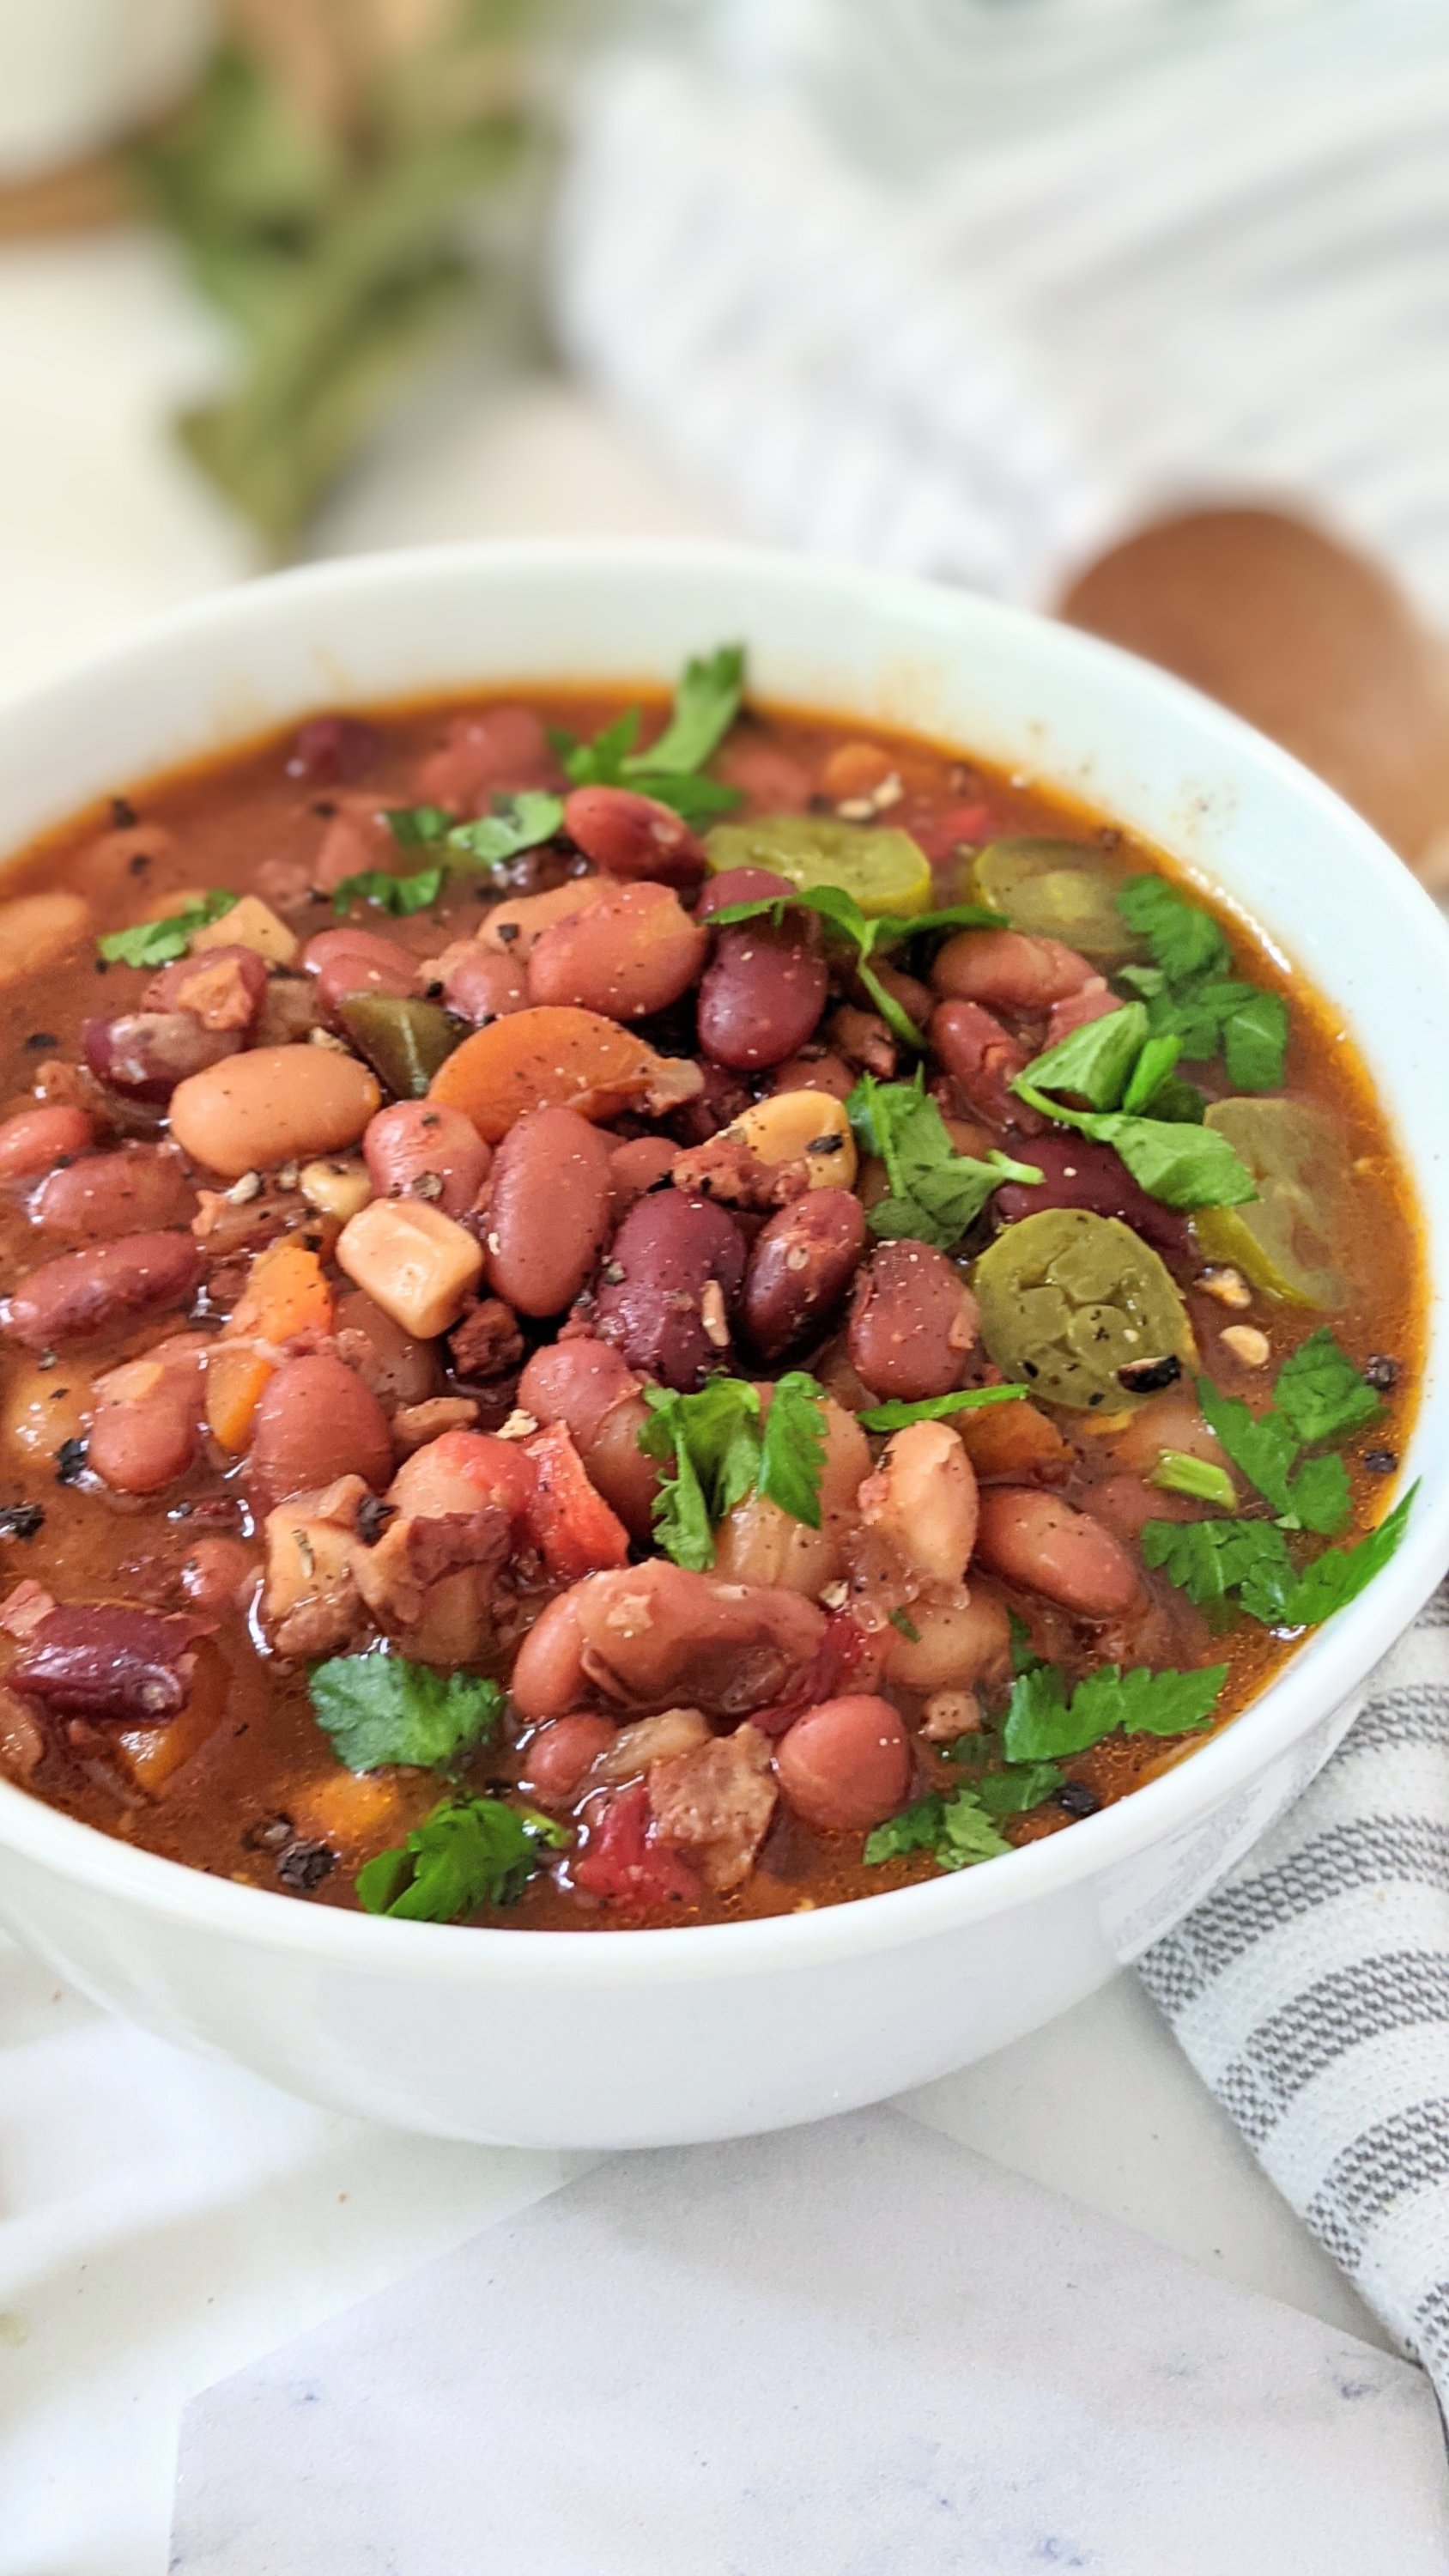 filling vegan stew recipes vegetarian lunches or dinners with beans bbq recipes healthy vegetariain lunches to keep you full gluten free bbq beans recipes with paleo bbq sauce